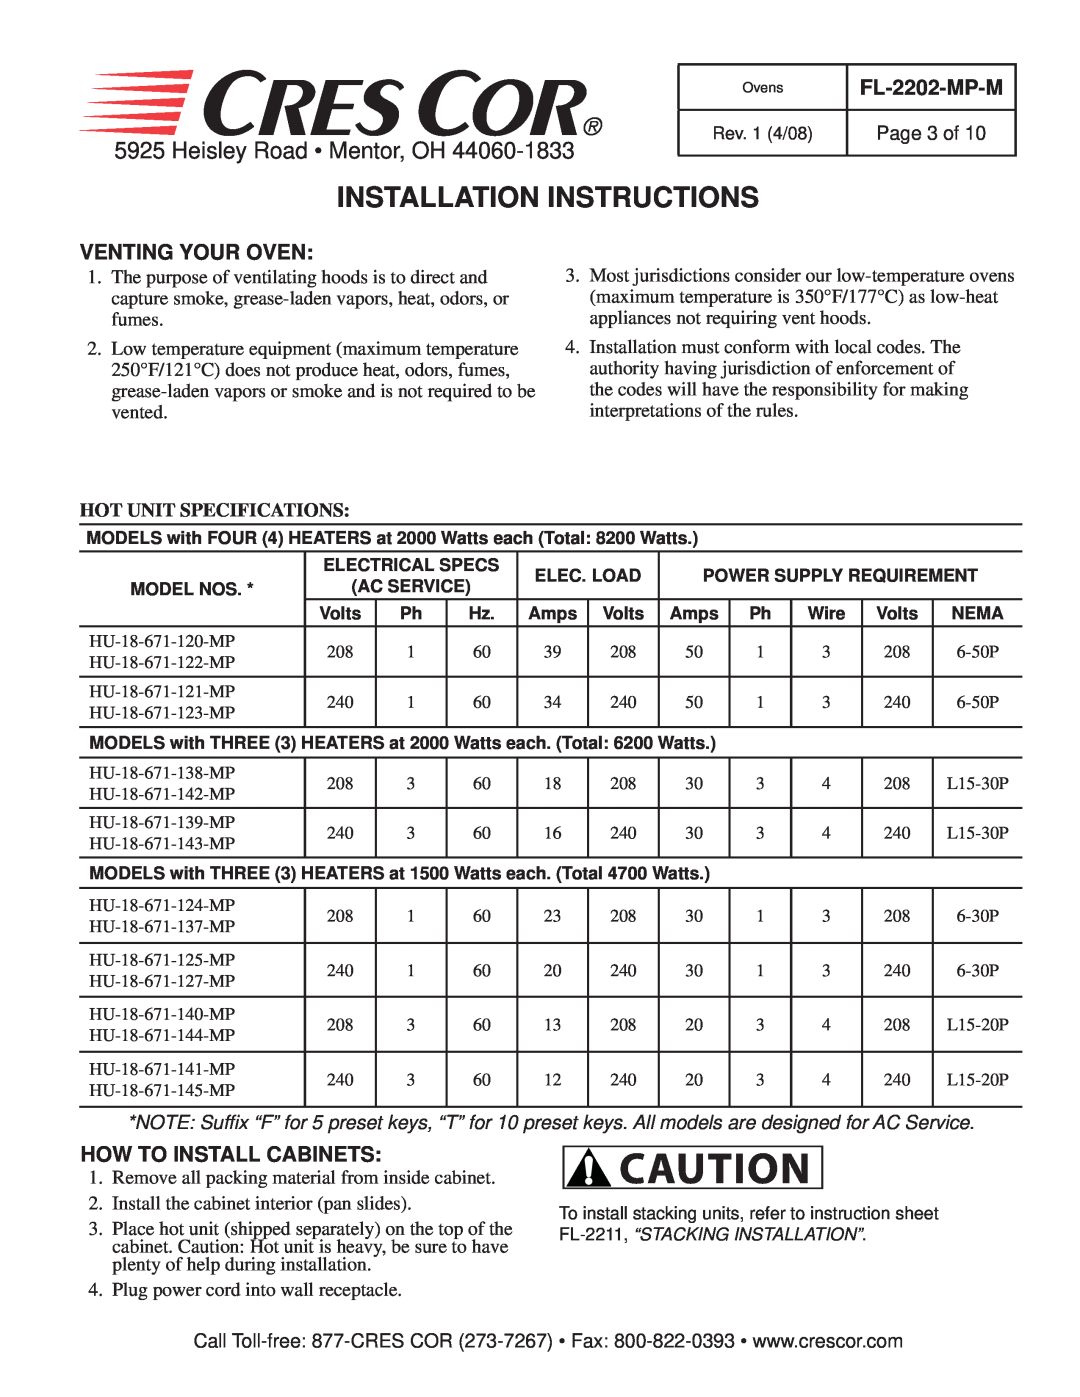 Cres Cor CO151FUA12 manual Installation Instructions, Heisley Road Mentor, OH, FL-2202-MP-M, Venting Your Oven, Page 3 of 